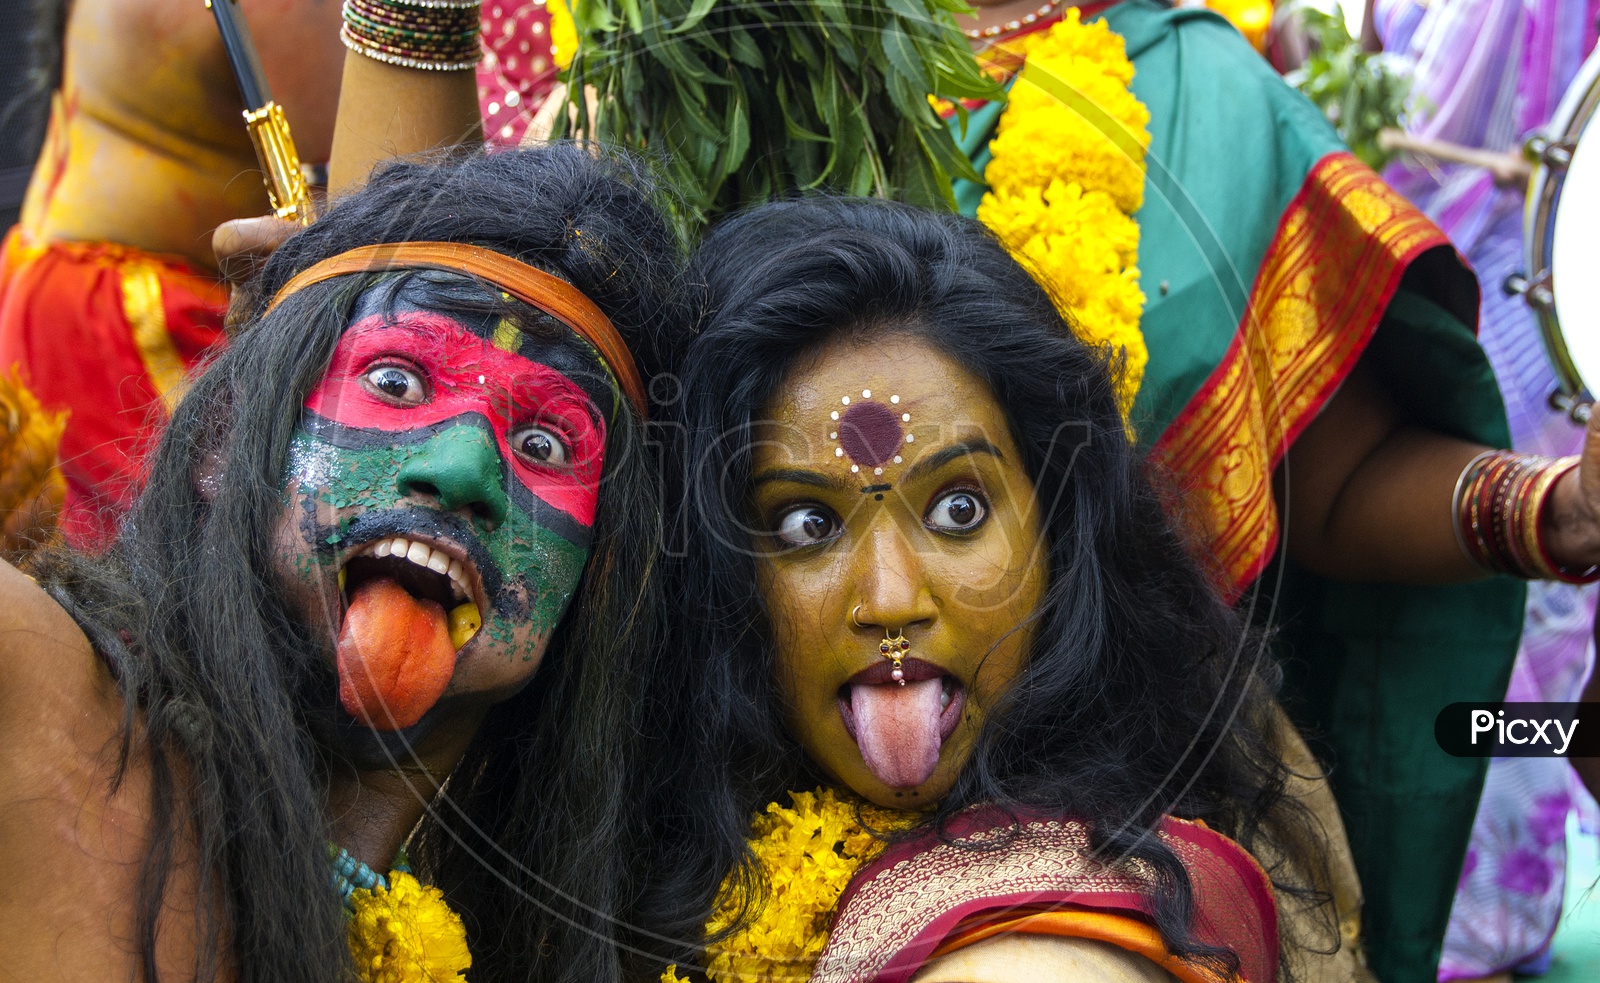 Modern extension to festivities Selfie style pose by a Potharaju and devotee women in action!